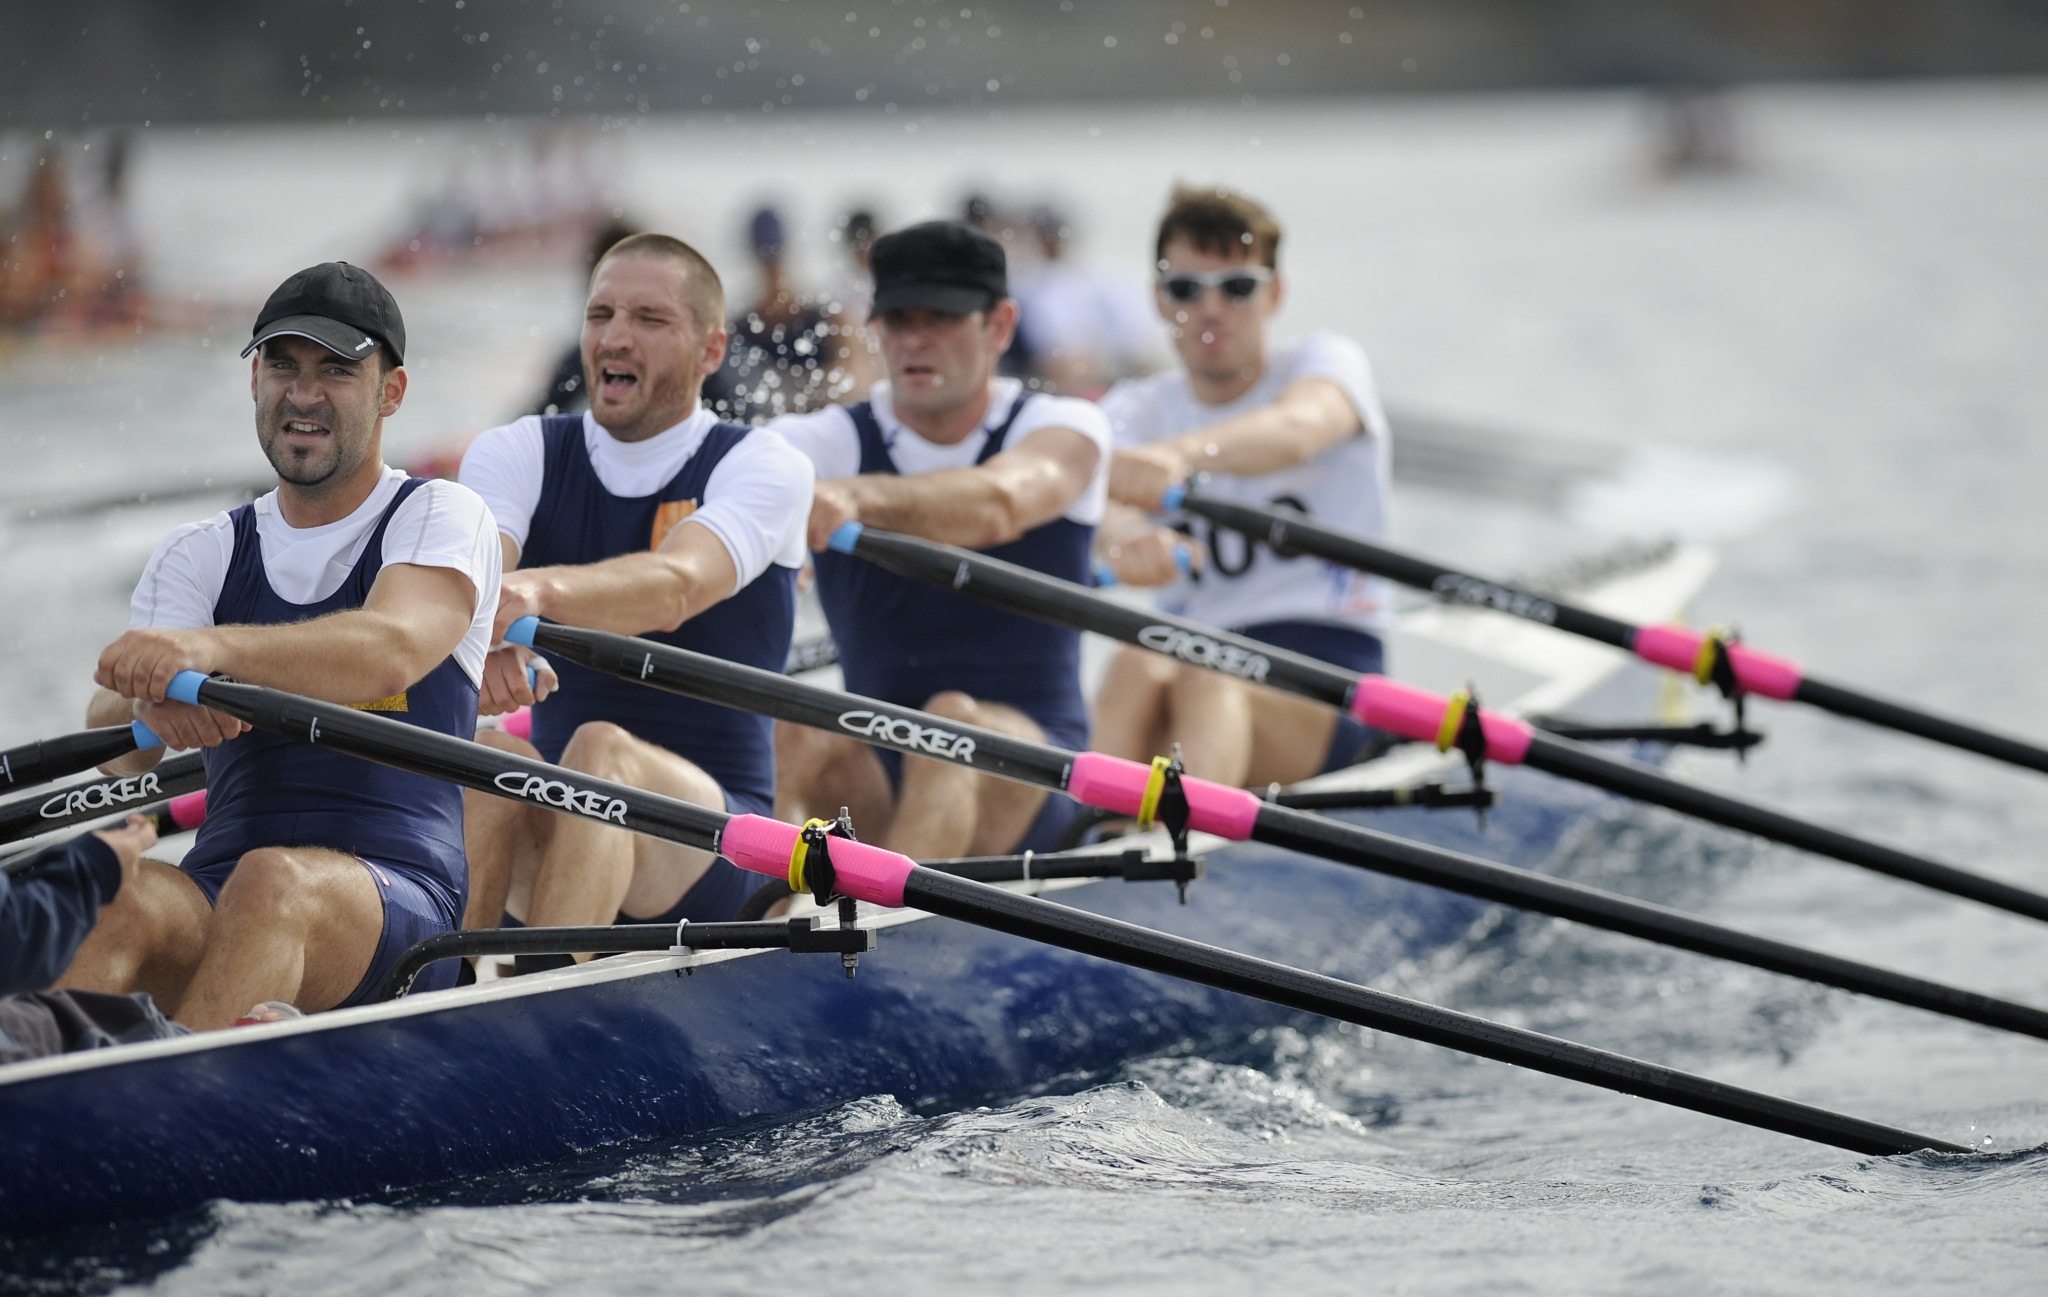 There are attempts underway to have coastal rowing added to the Paris 2024 Olympics ©Getty Images